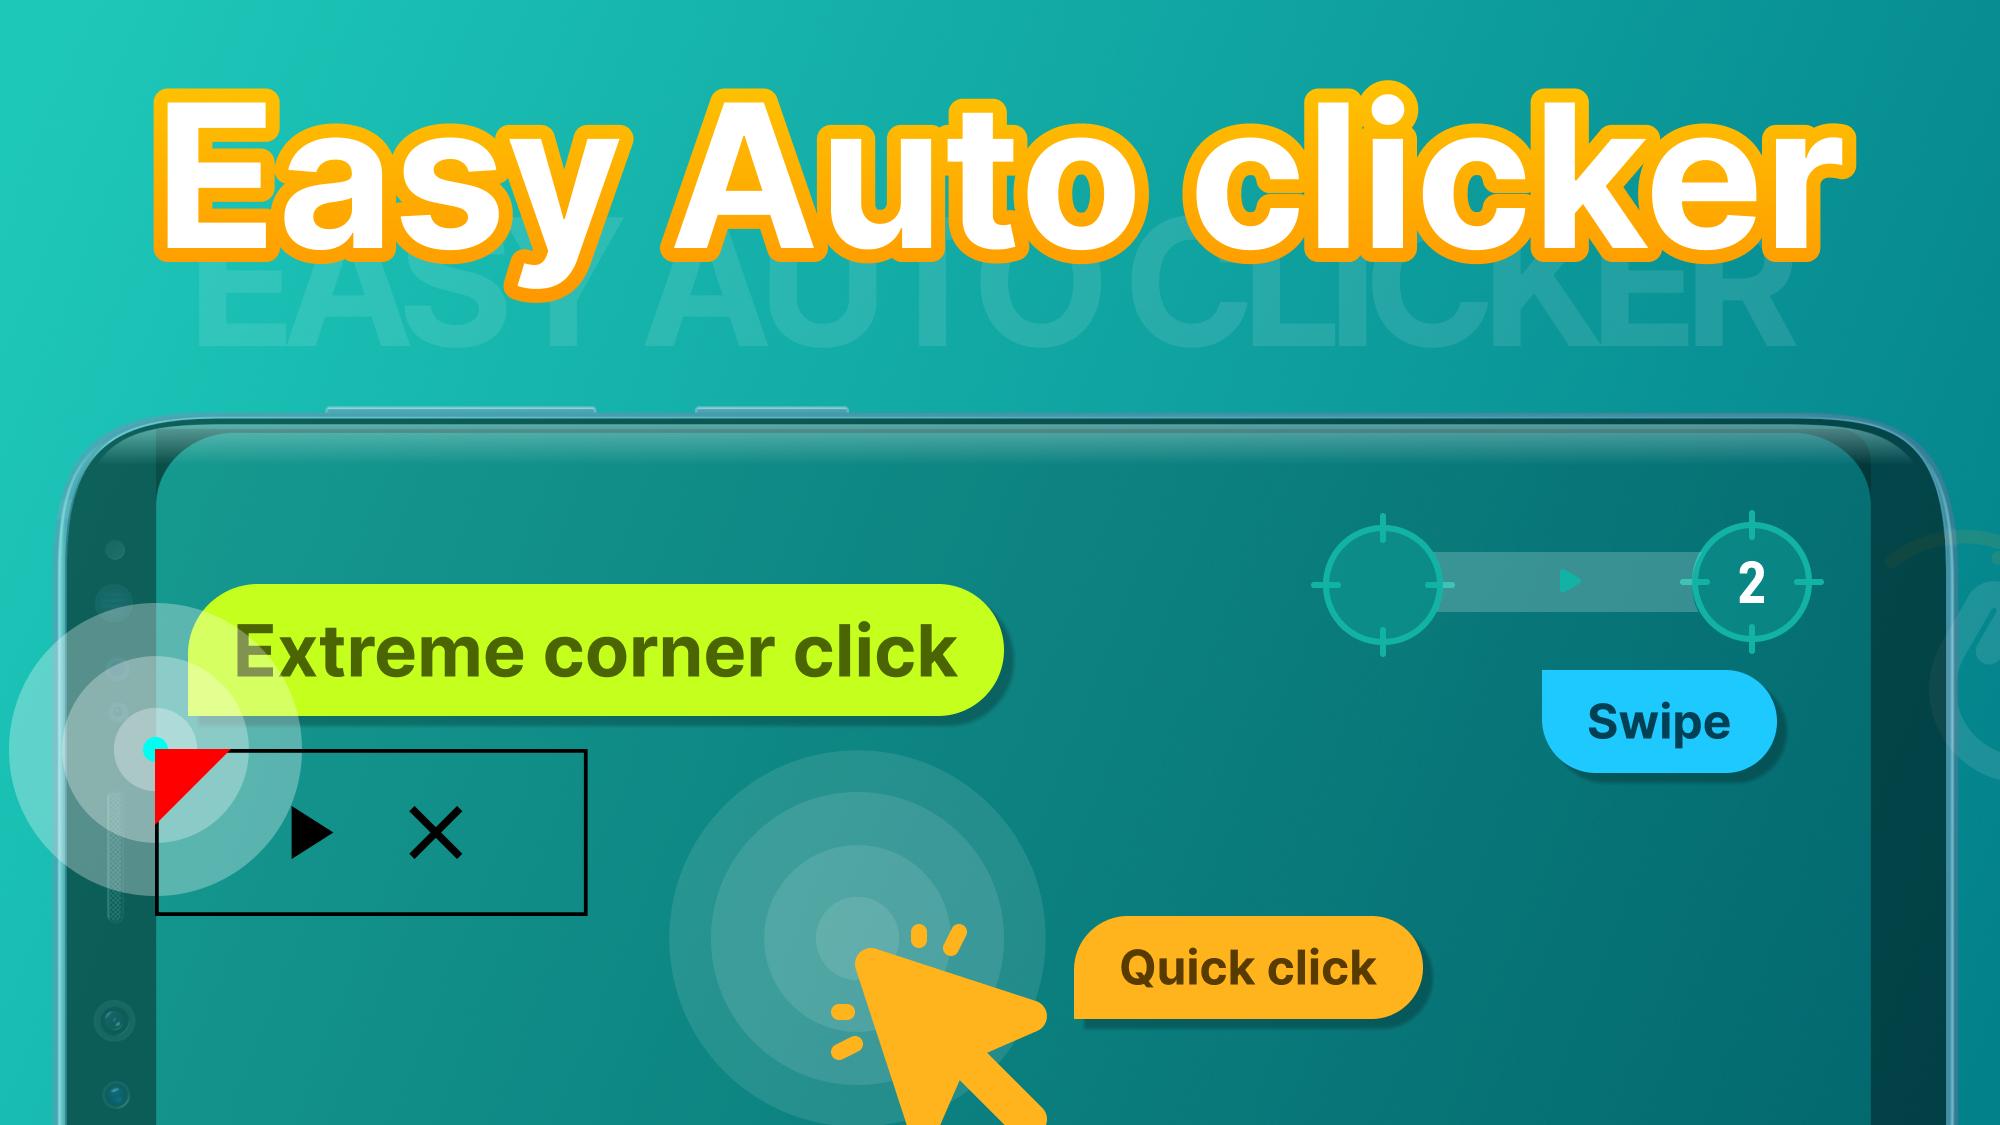 Download Auto Clicker (Speed & Easy) android on PC